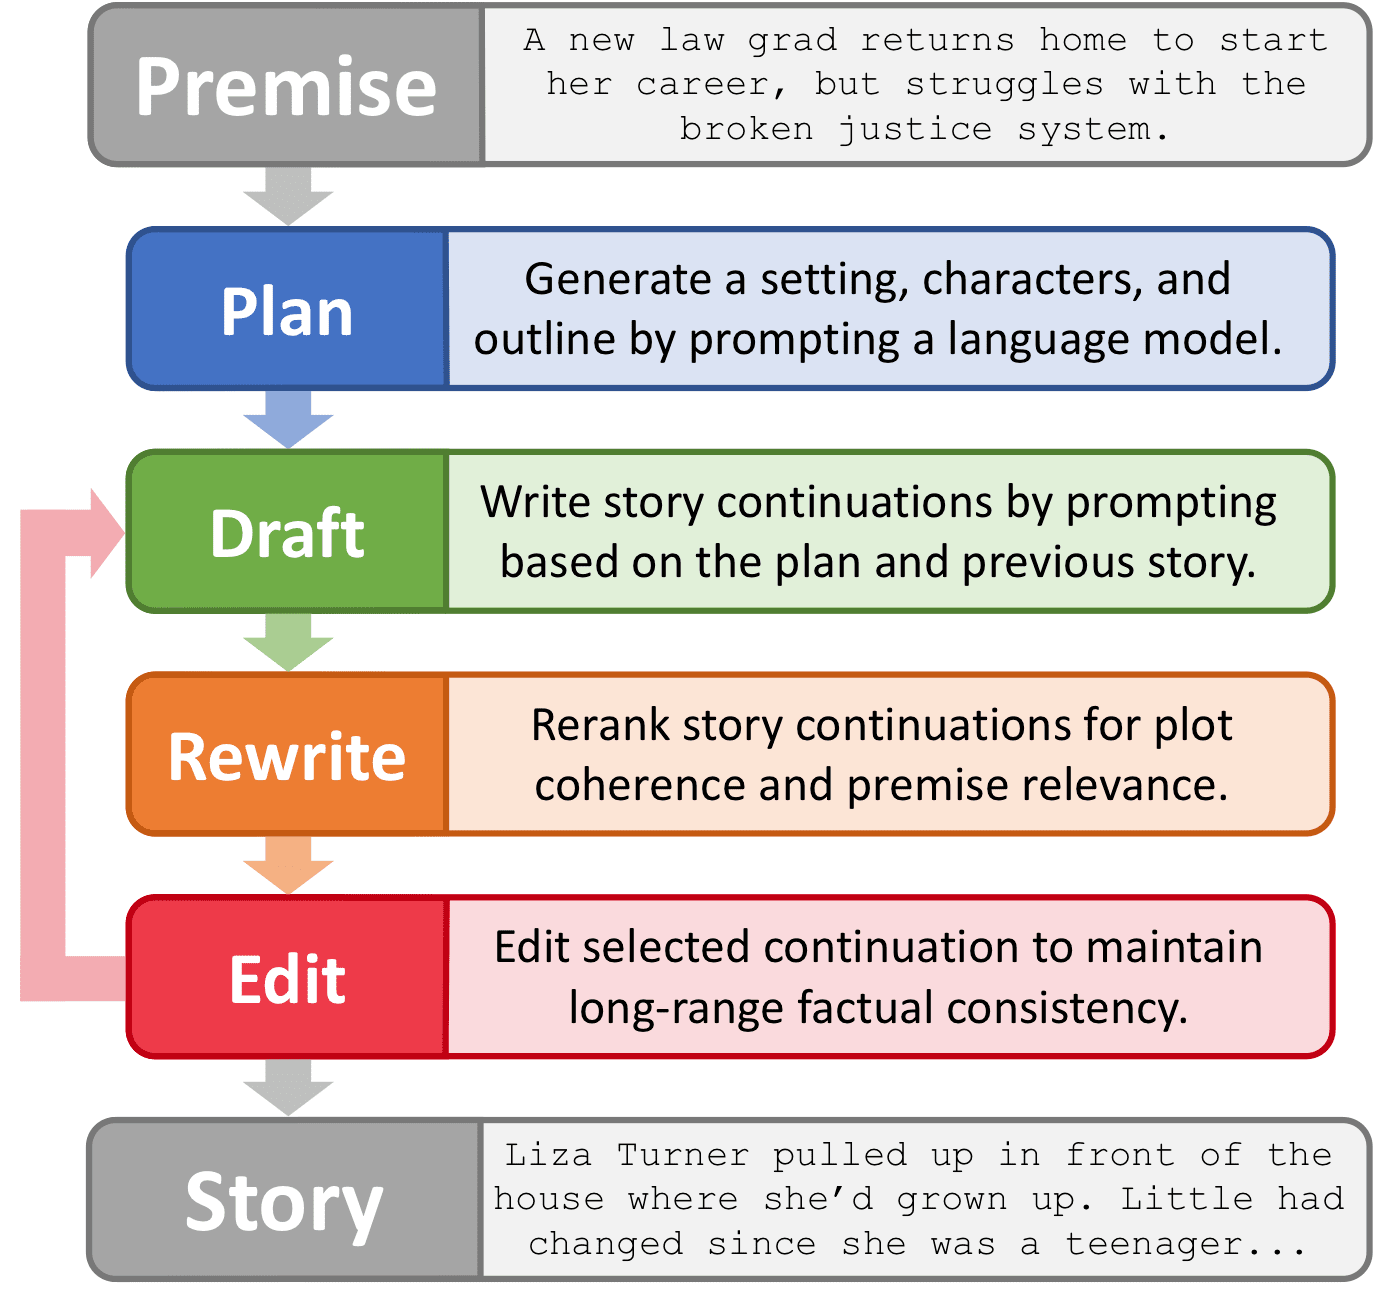 A flowchart, showing the following phases: Premise, Plan, Draft, Rewrite, Edit, Story. There is an extra arrow from Edit to Draft, implying that the process can loop through those steps repeatedly.